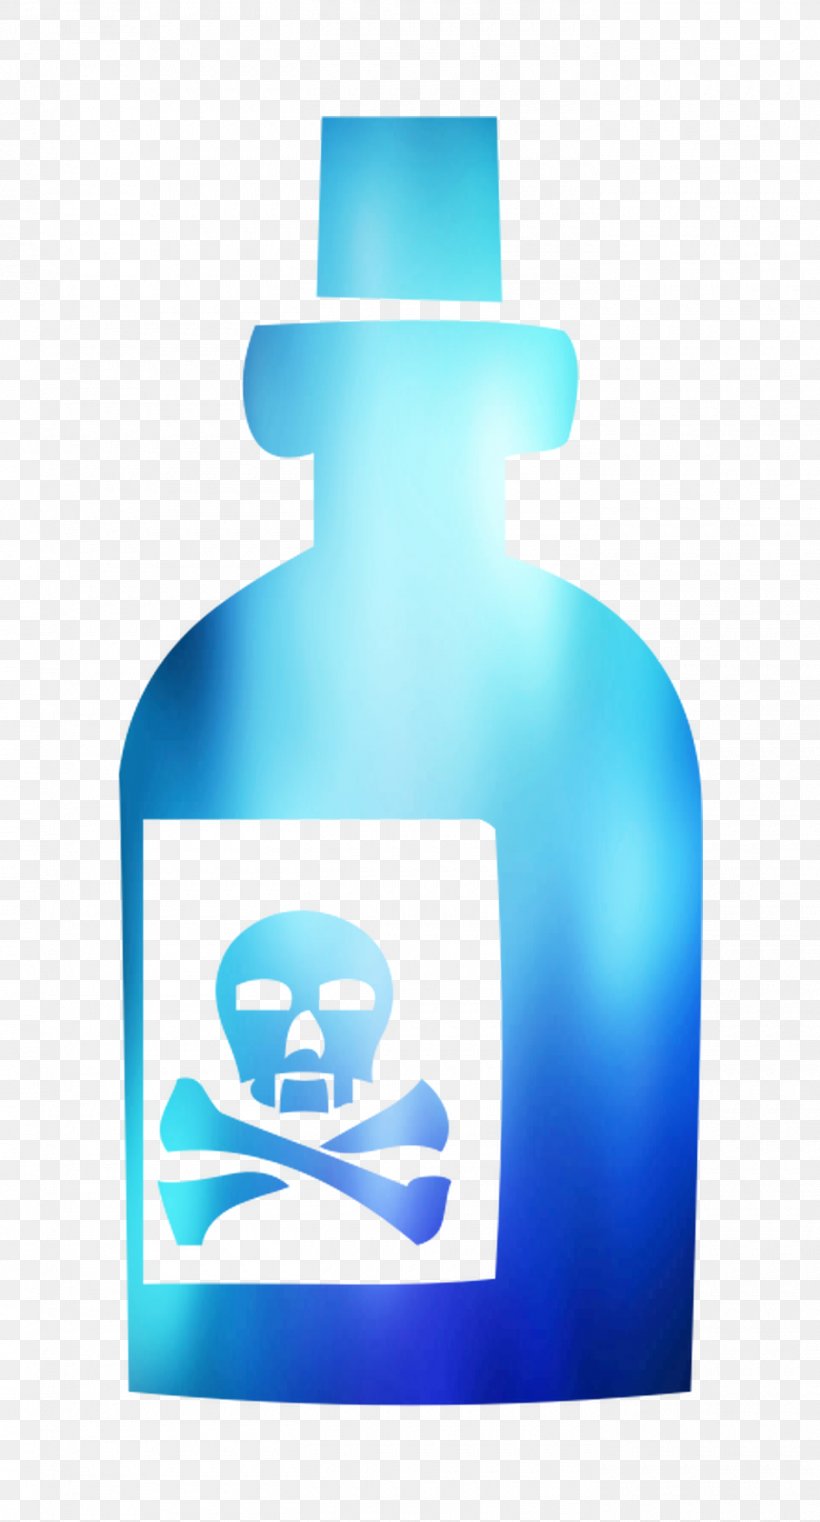 Water Bottles Glass Bottle Product, PNG, 1400x2600px, Water Bottles, Blue, Bottle, Glass, Glass Bottle Download Free